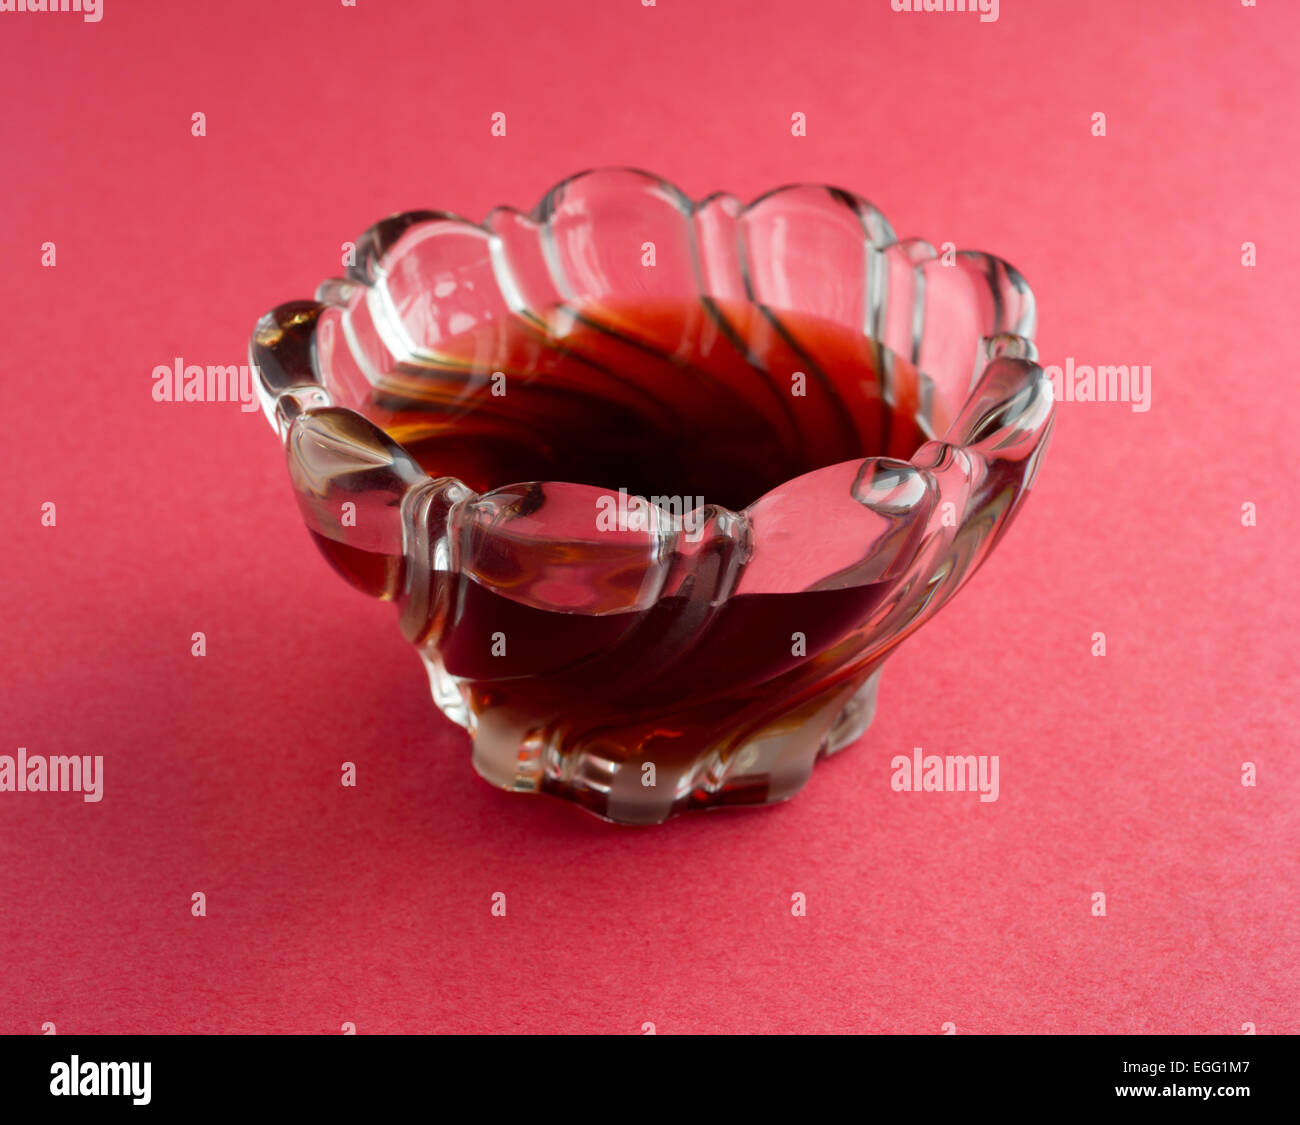 Side view of a decorative glass bowl filled with maple syrup on a red background. Stock Photo